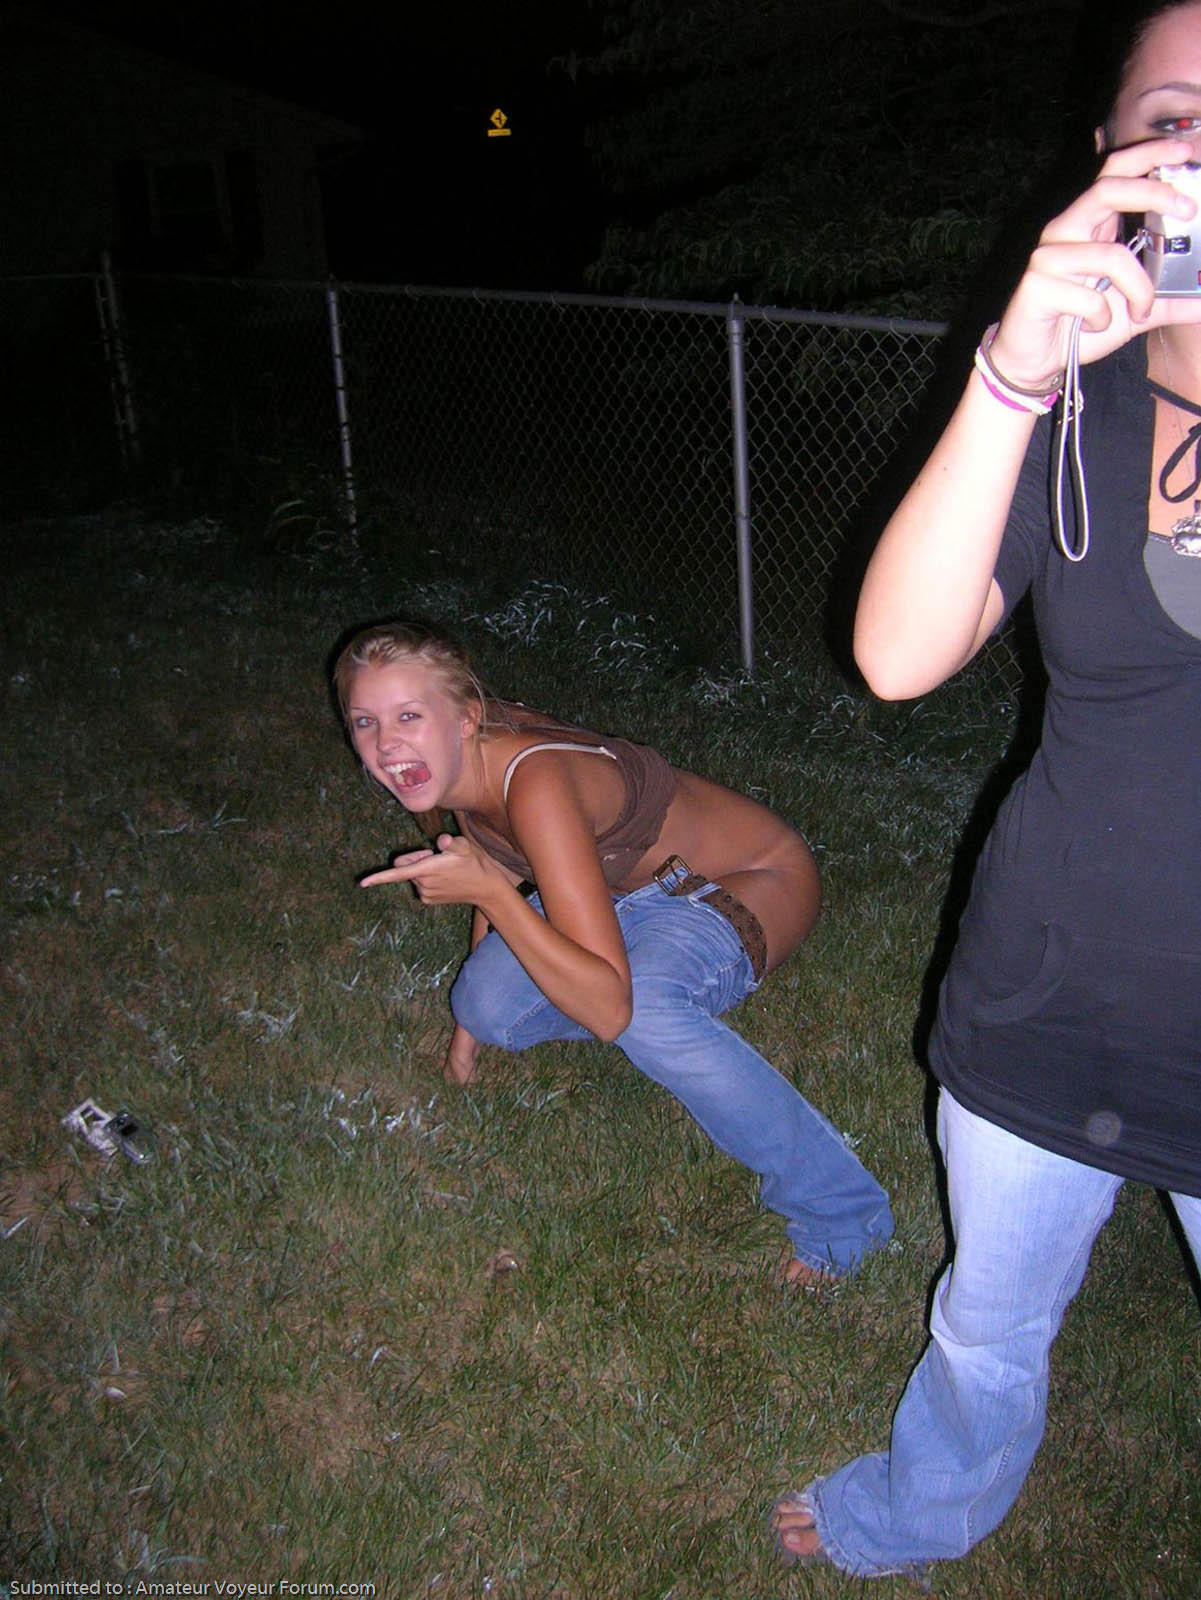 Scuttlebutt recommendet nude teens peeing outside together